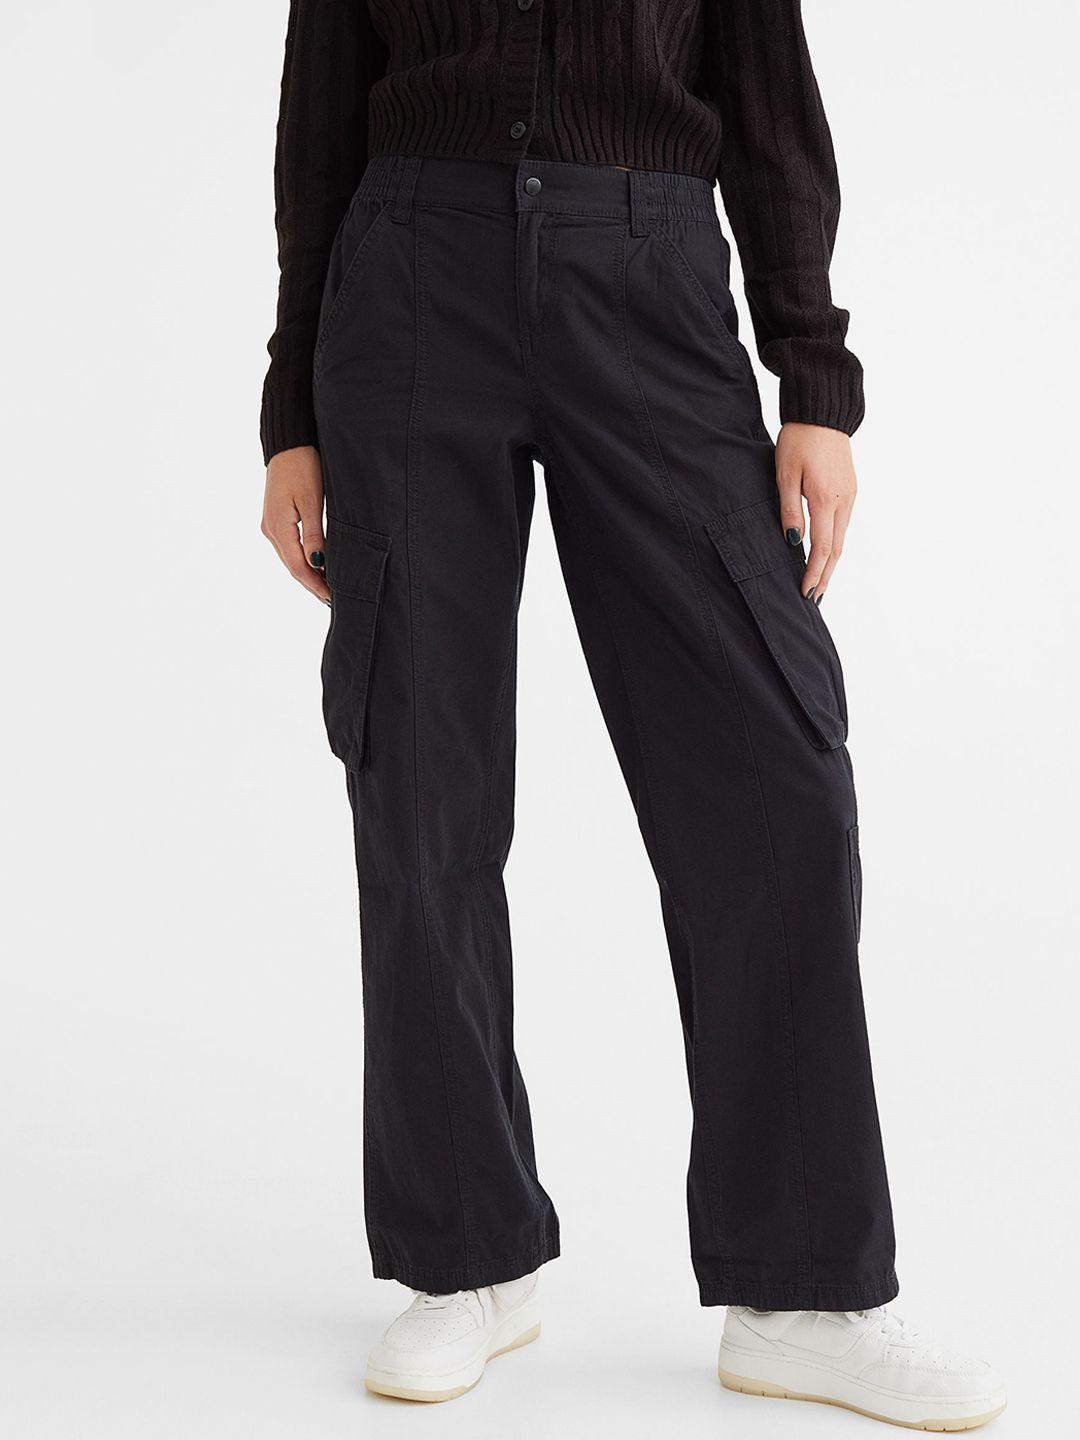 H&M Canvas Cargo Trousers